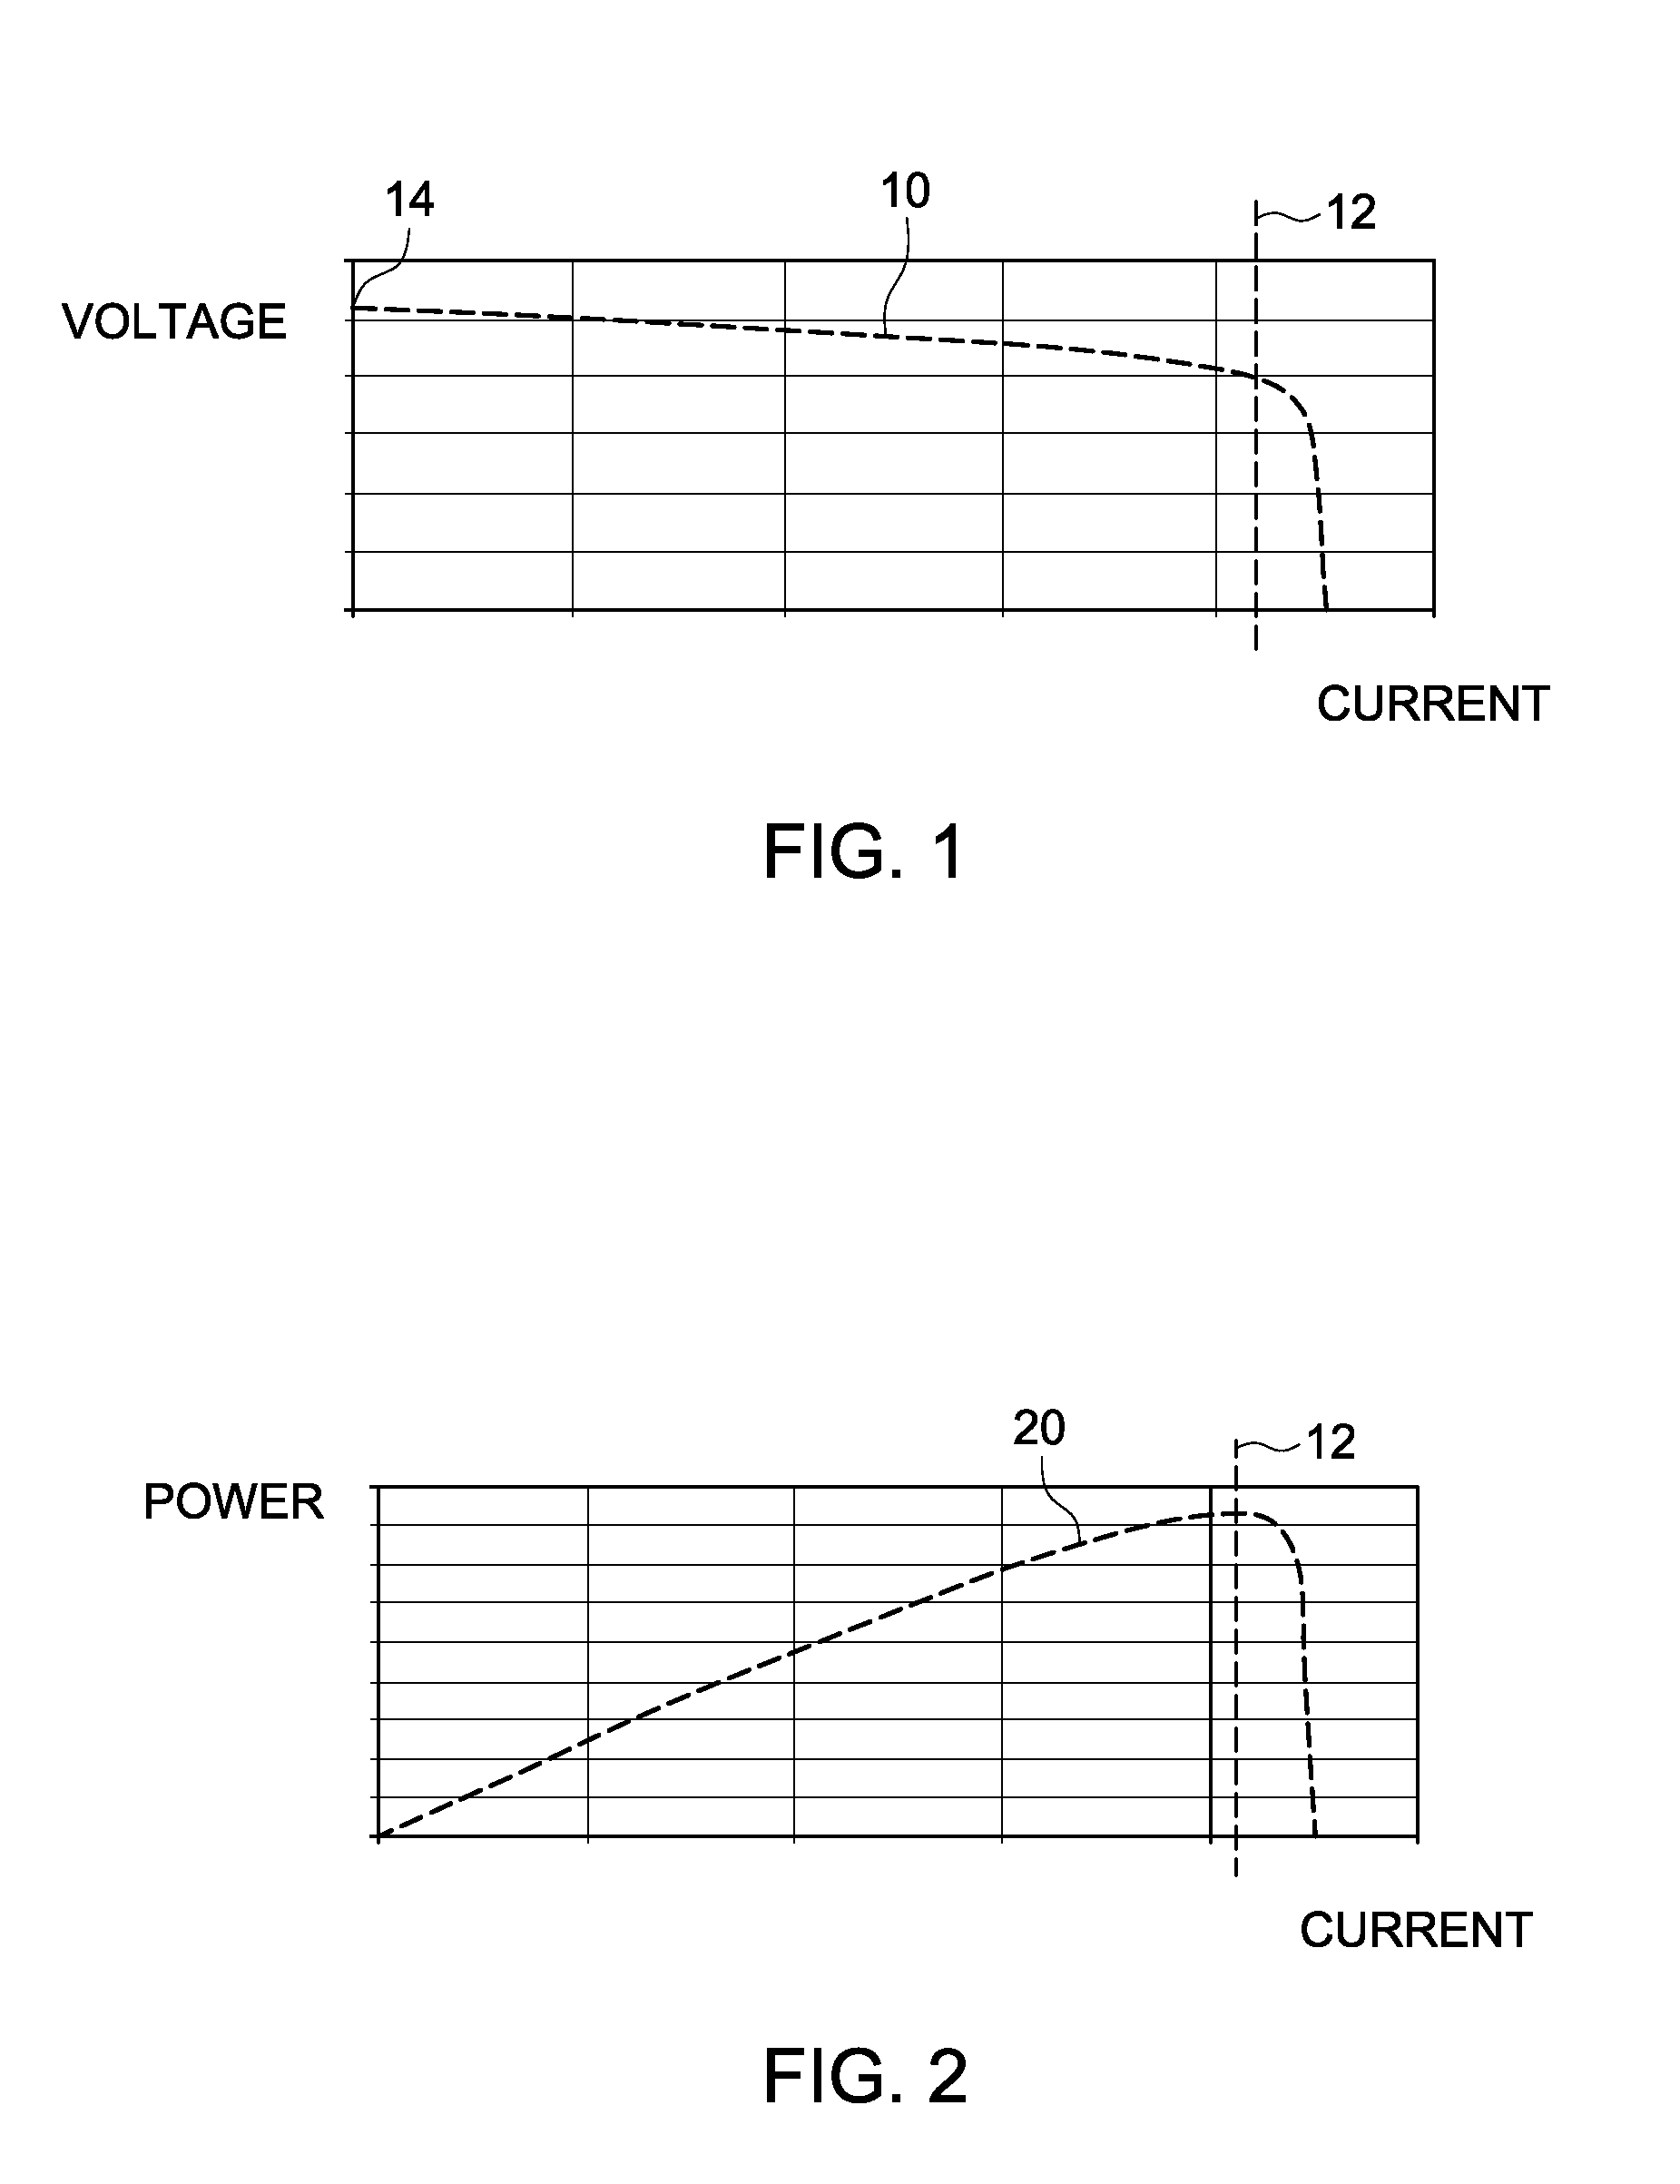 Photovoltaic inverter system and method of starting same at high open-circuit voltage